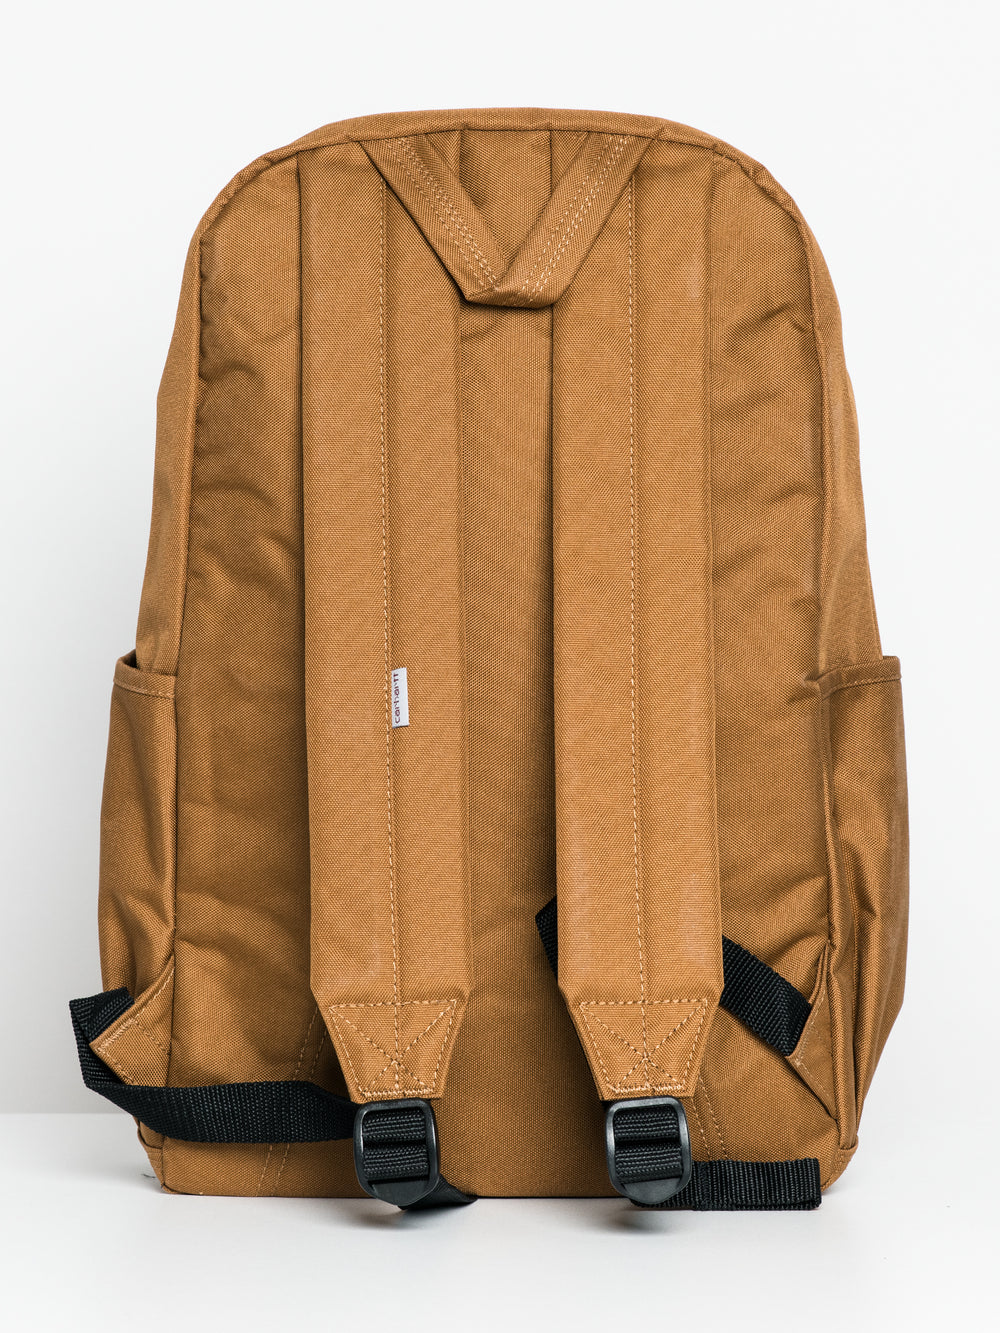 CARHARTT TRADE PLUS 21L BACKPACK - BROWN - CLEARANCE